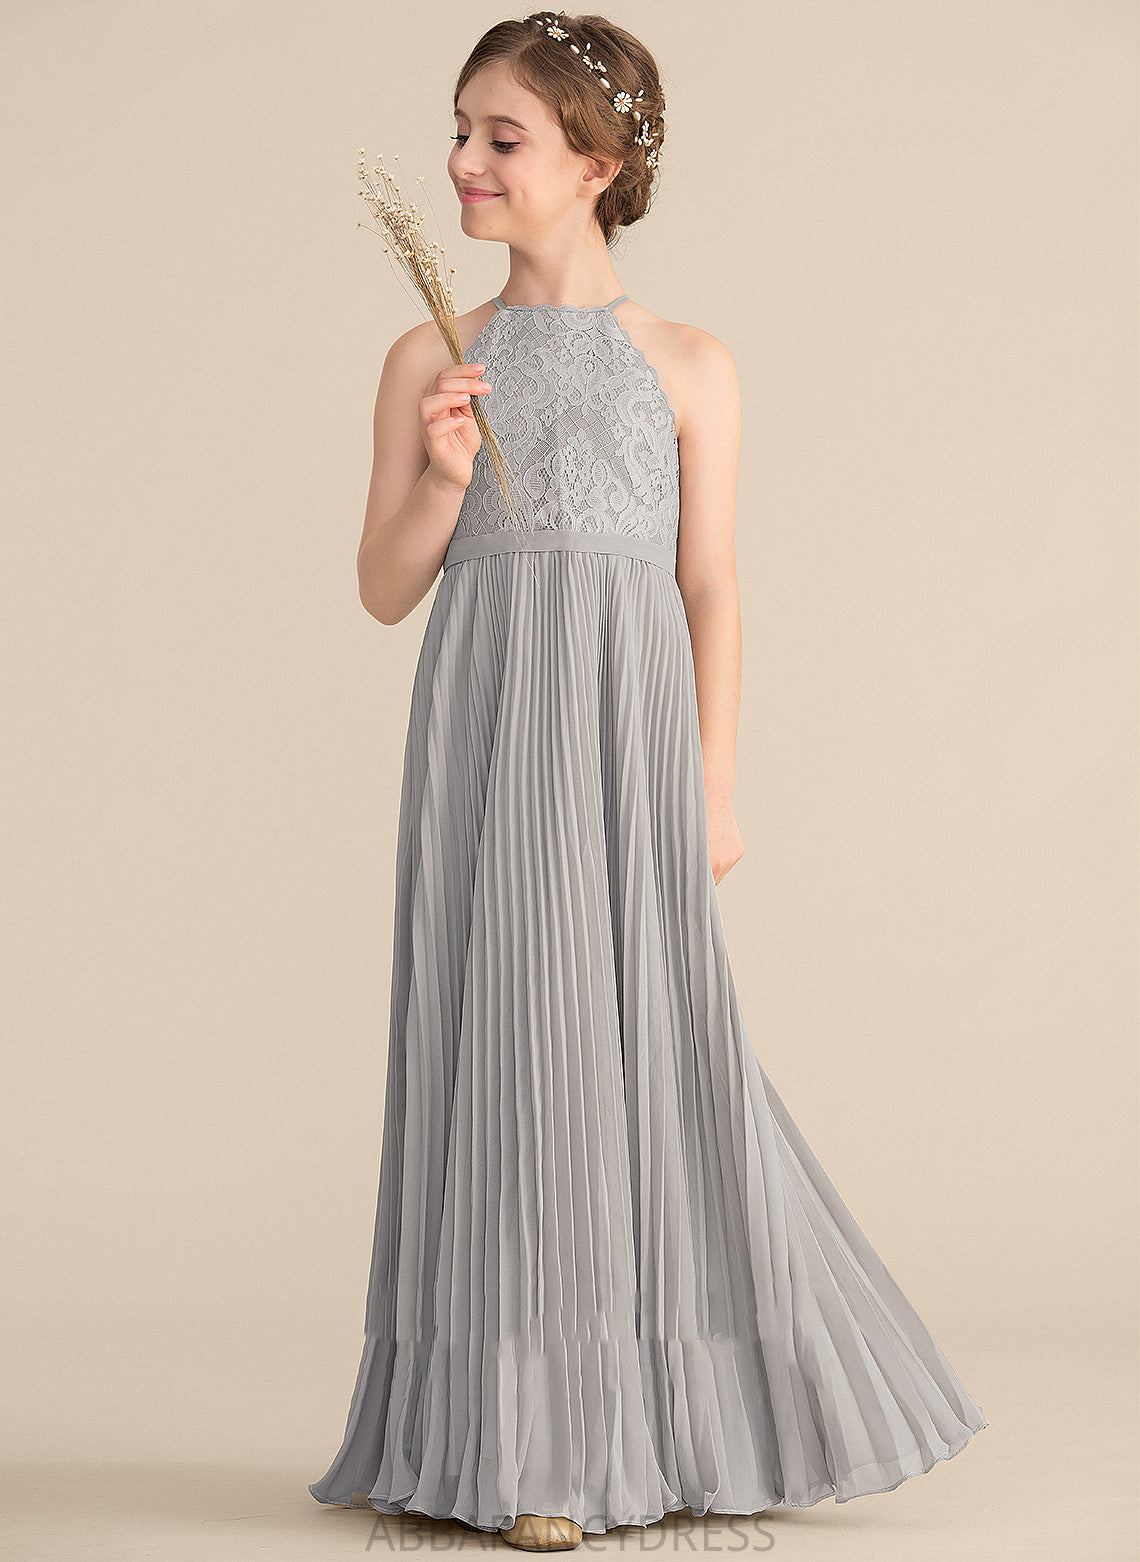 Chiffon Neck Amira Junior Bridesmaid Dresses Pleated With Floor-Length Scoop A-Line Lace